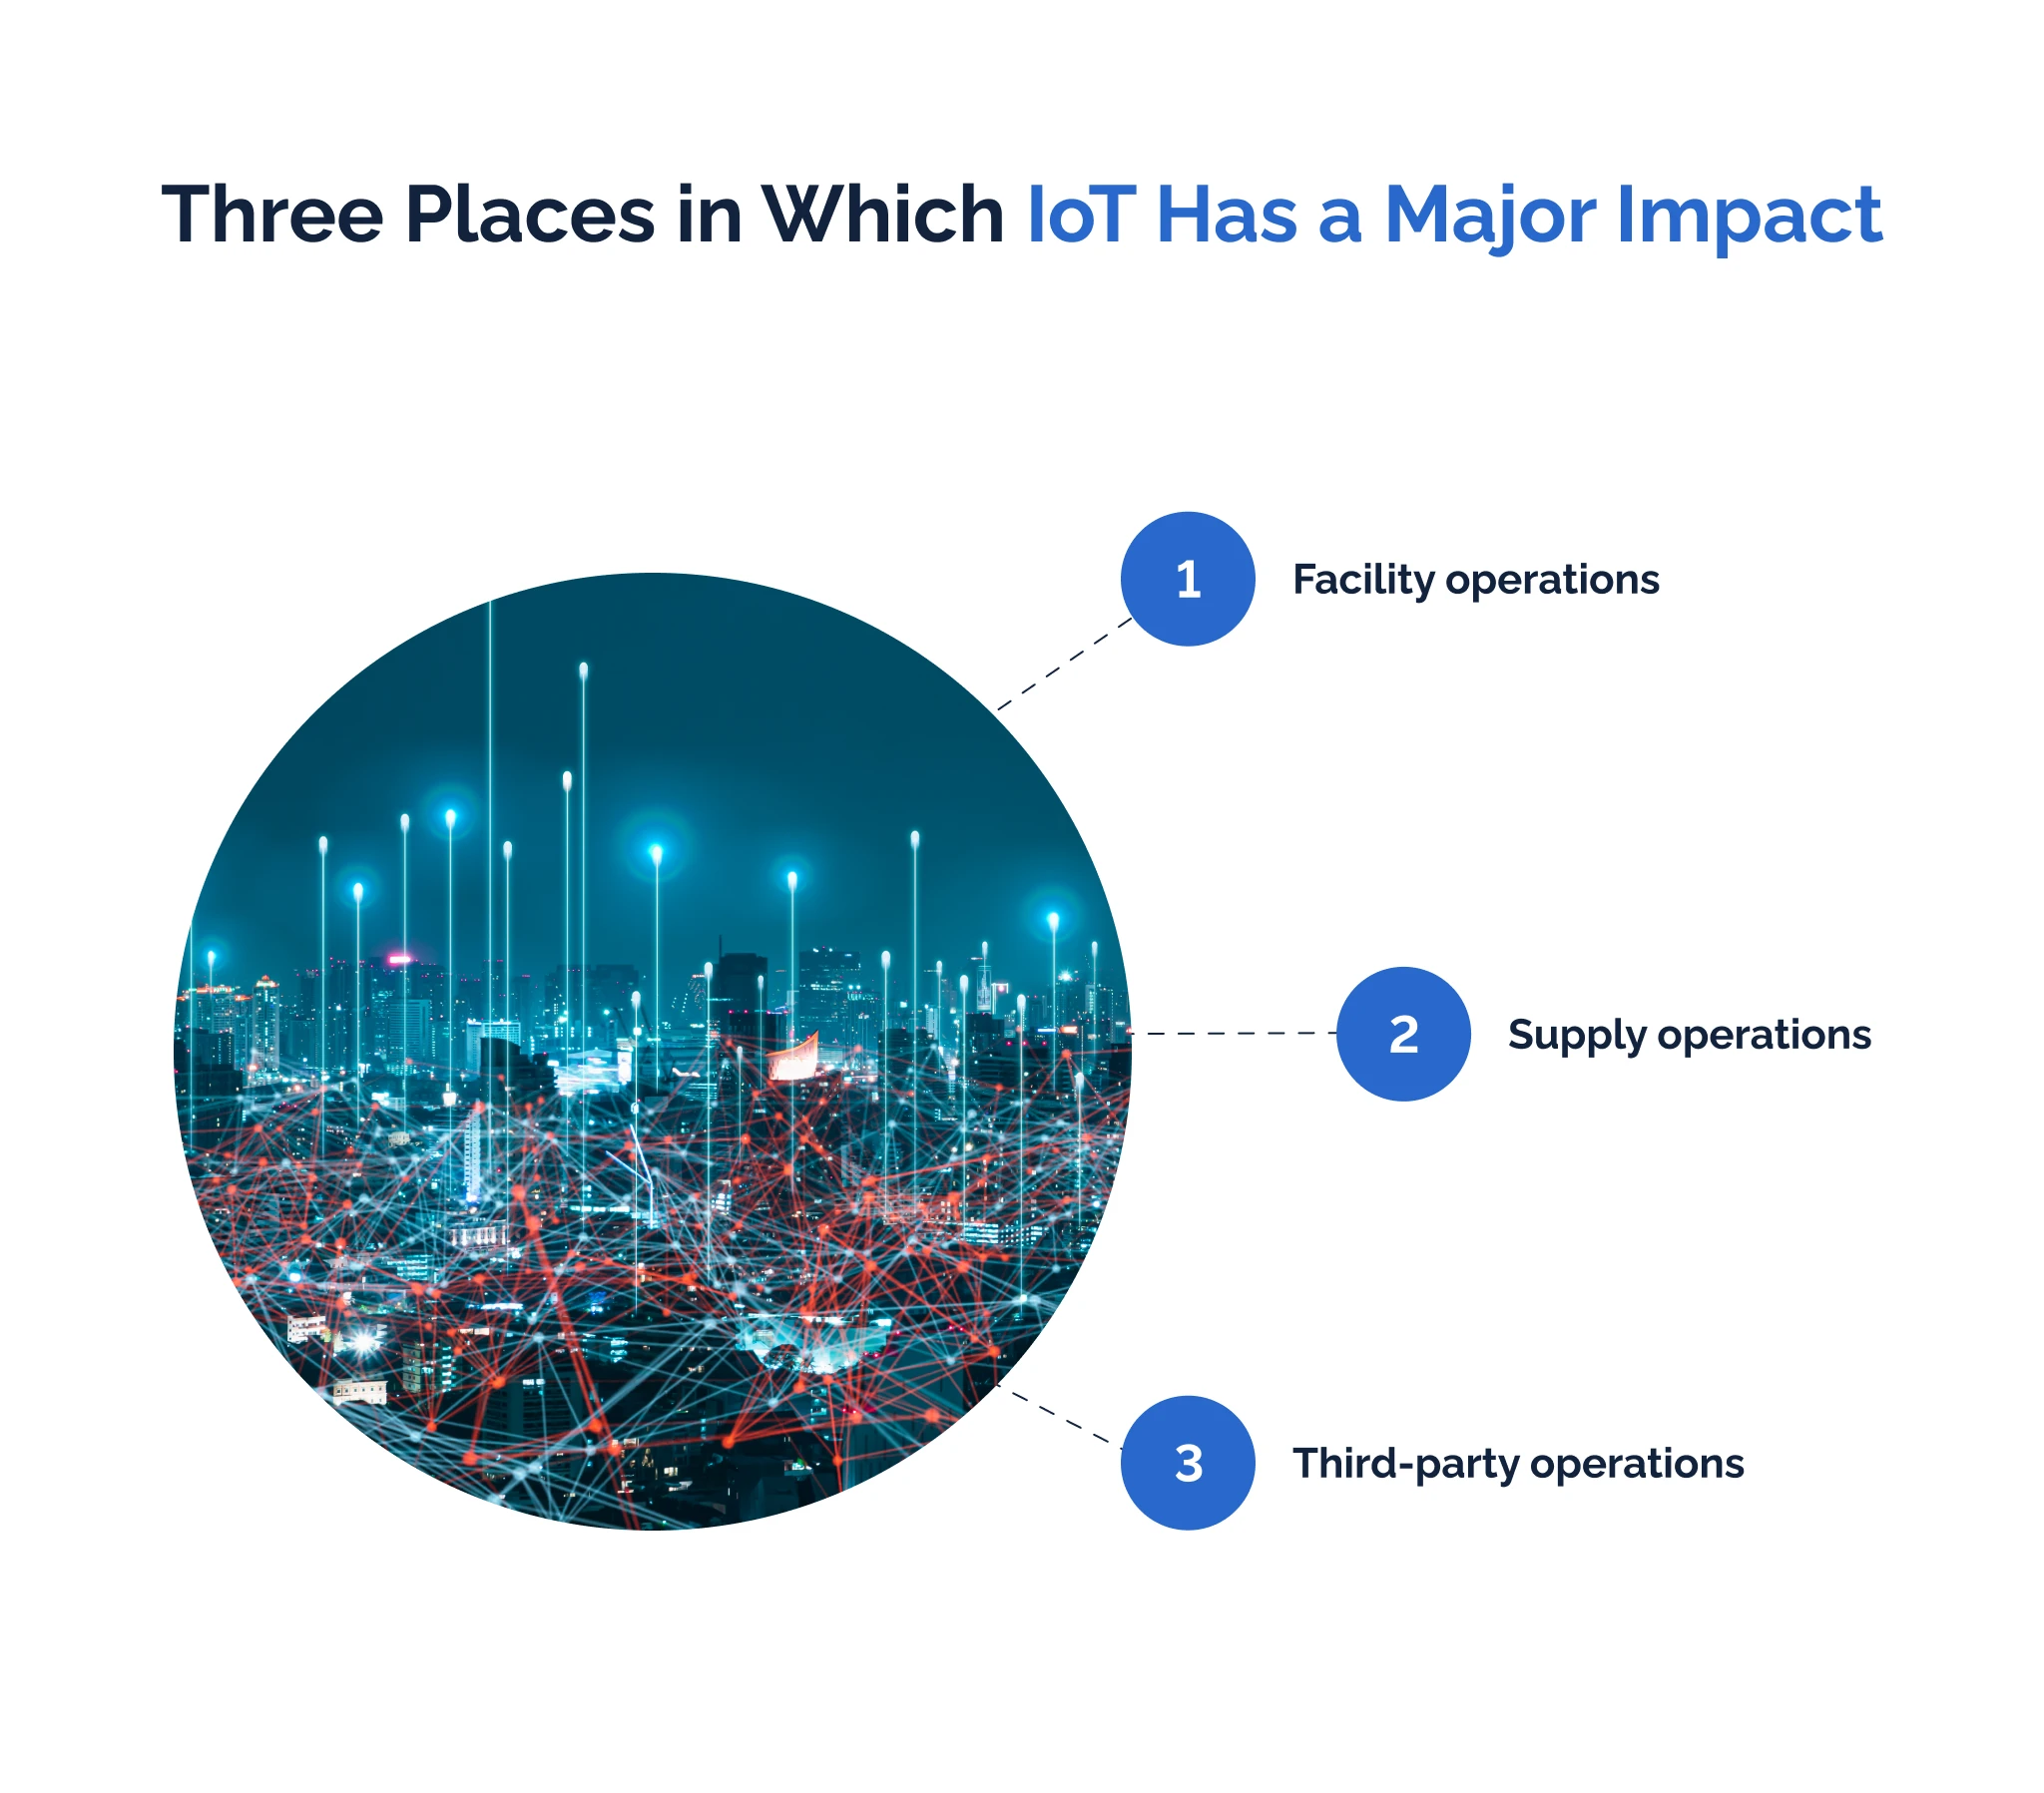 Three places in which IoT has a major impact